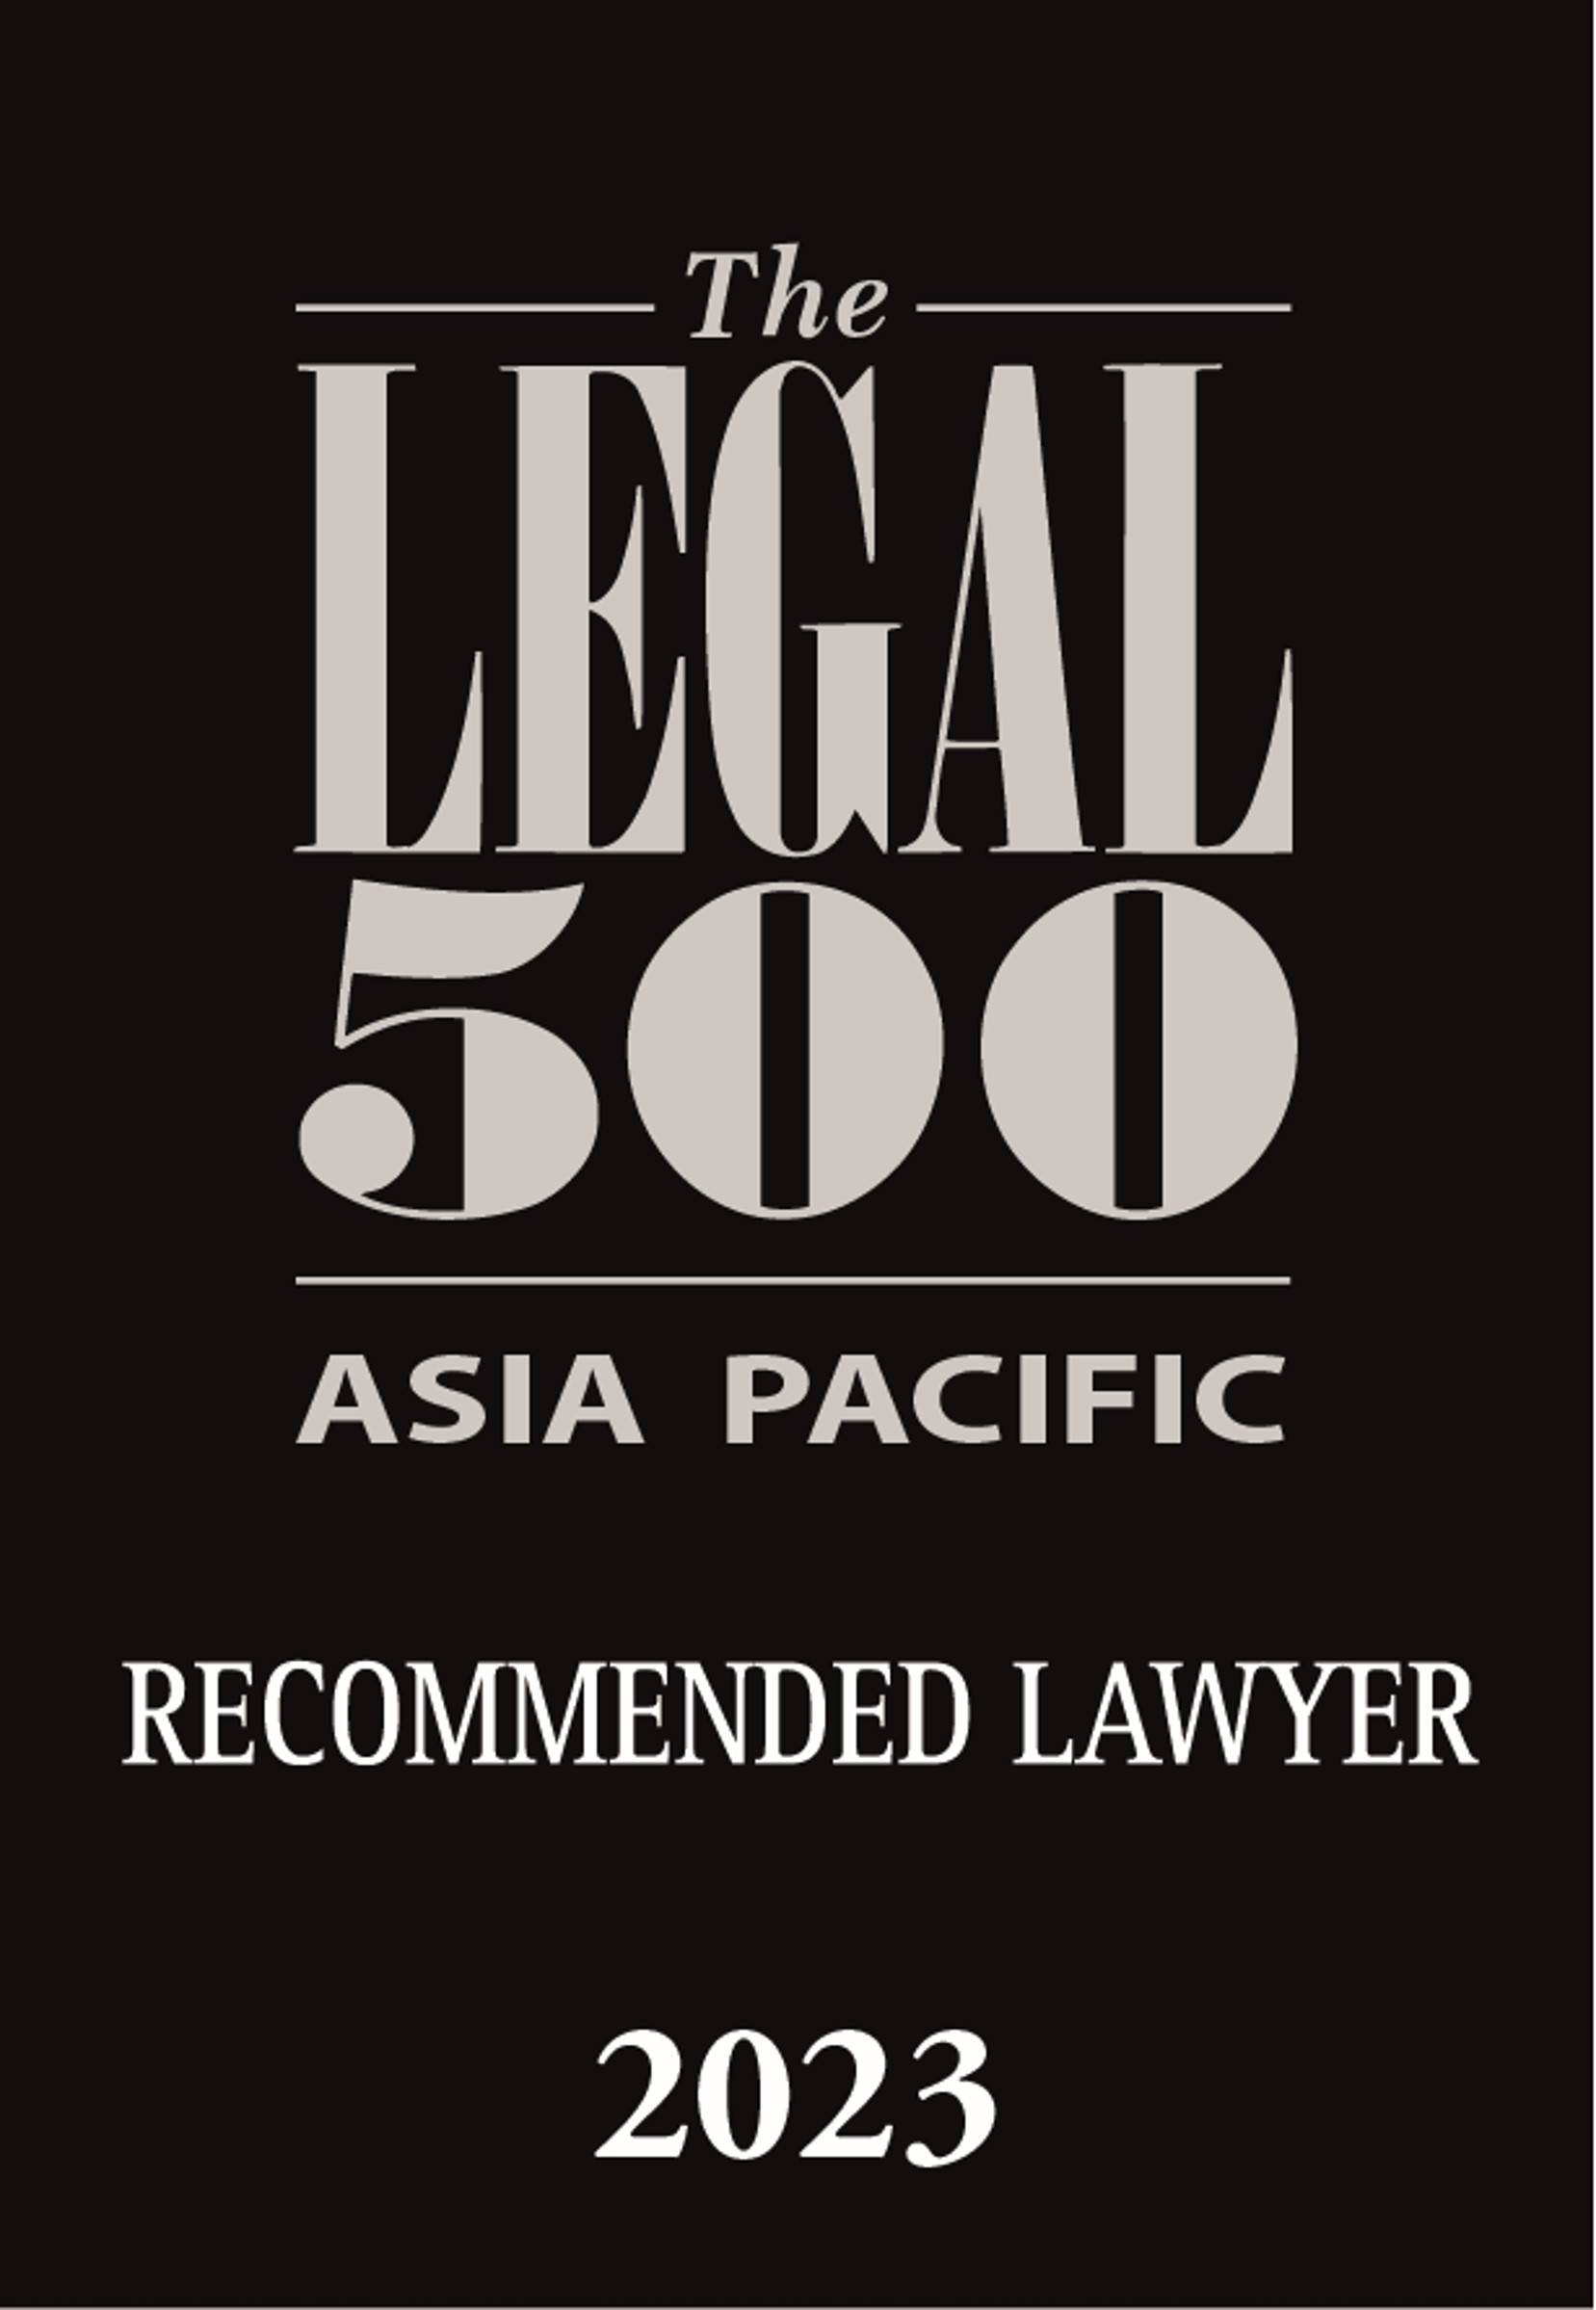 Recommended Lawyer in Corporate (including M&A): Hong Kong, Rossana Chu, 2023